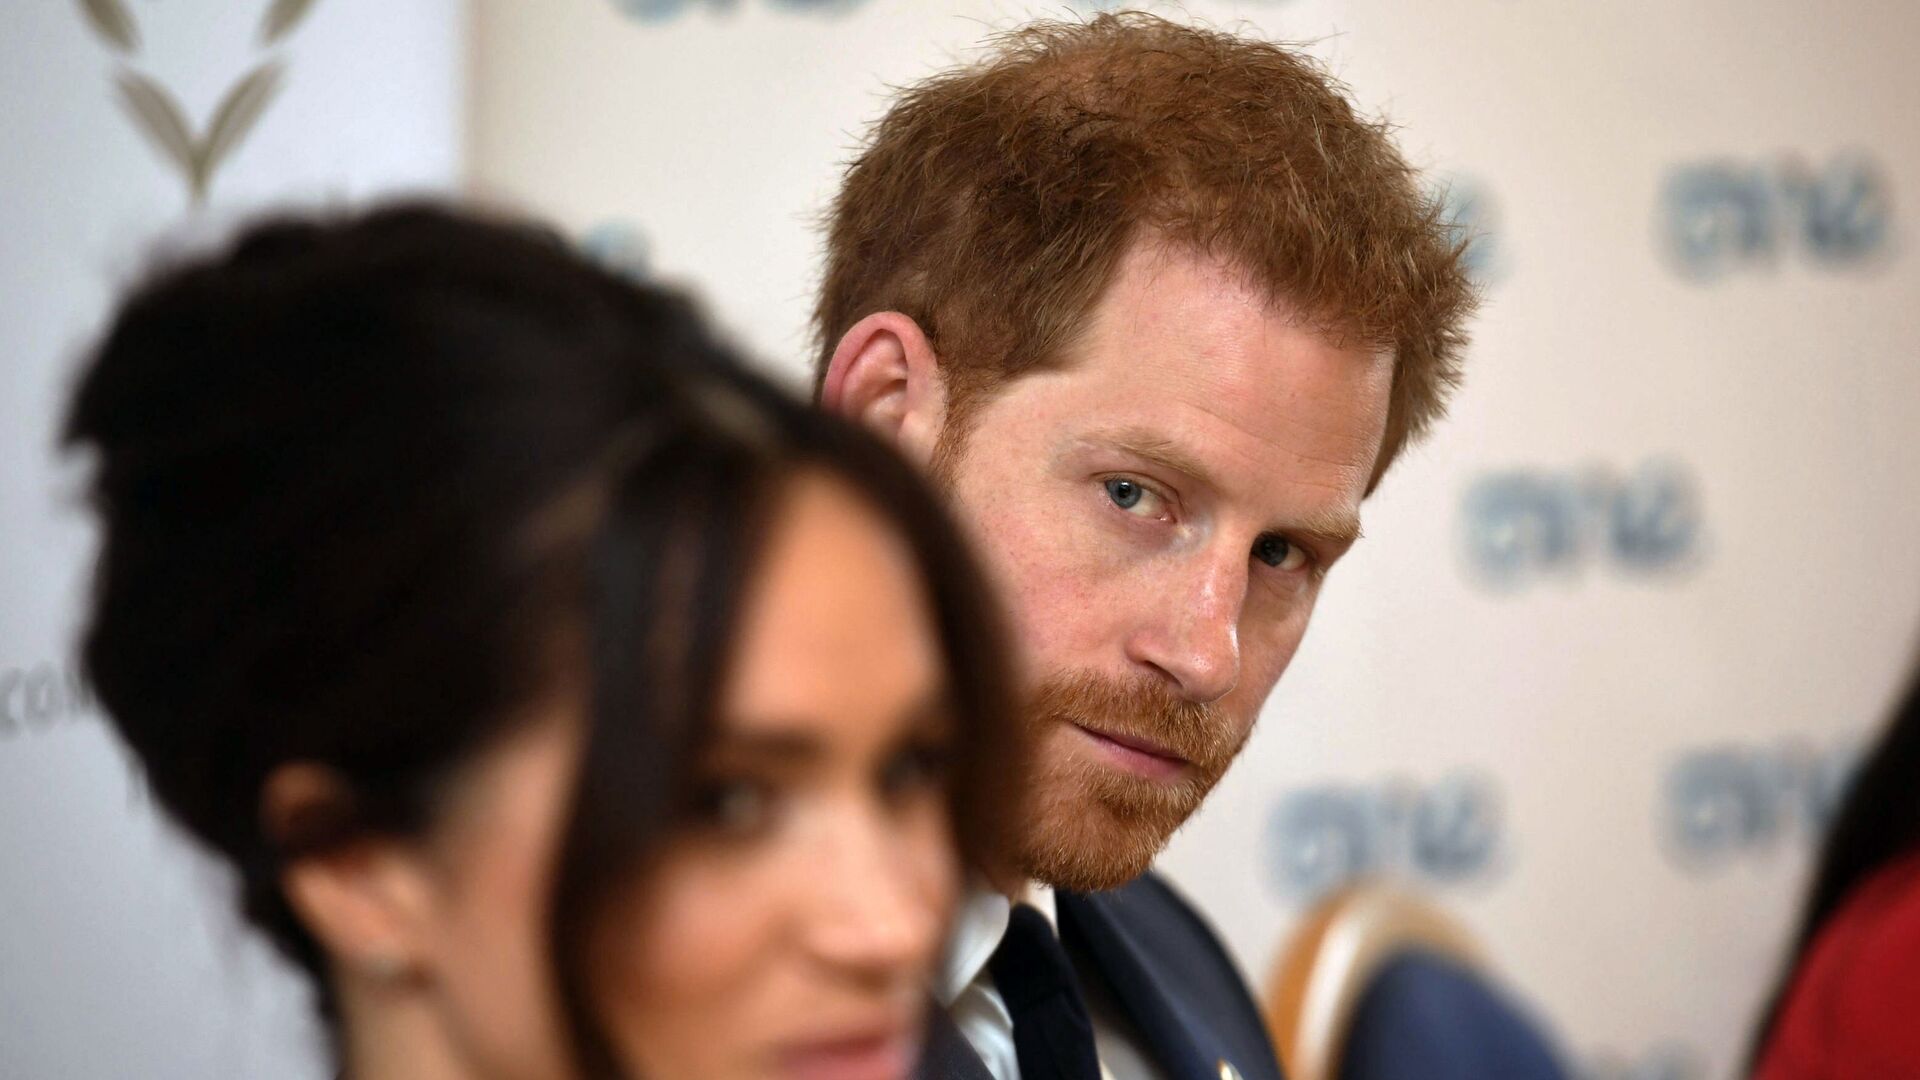 Britain's Prince Harry and Meghan Duchess of Sussex attend a roundtable discussion on gender equality at Windsor Castle in Windsor, England, Friday Oct. 25, 2019. - Sputnik International, 1920, 15.03.2021